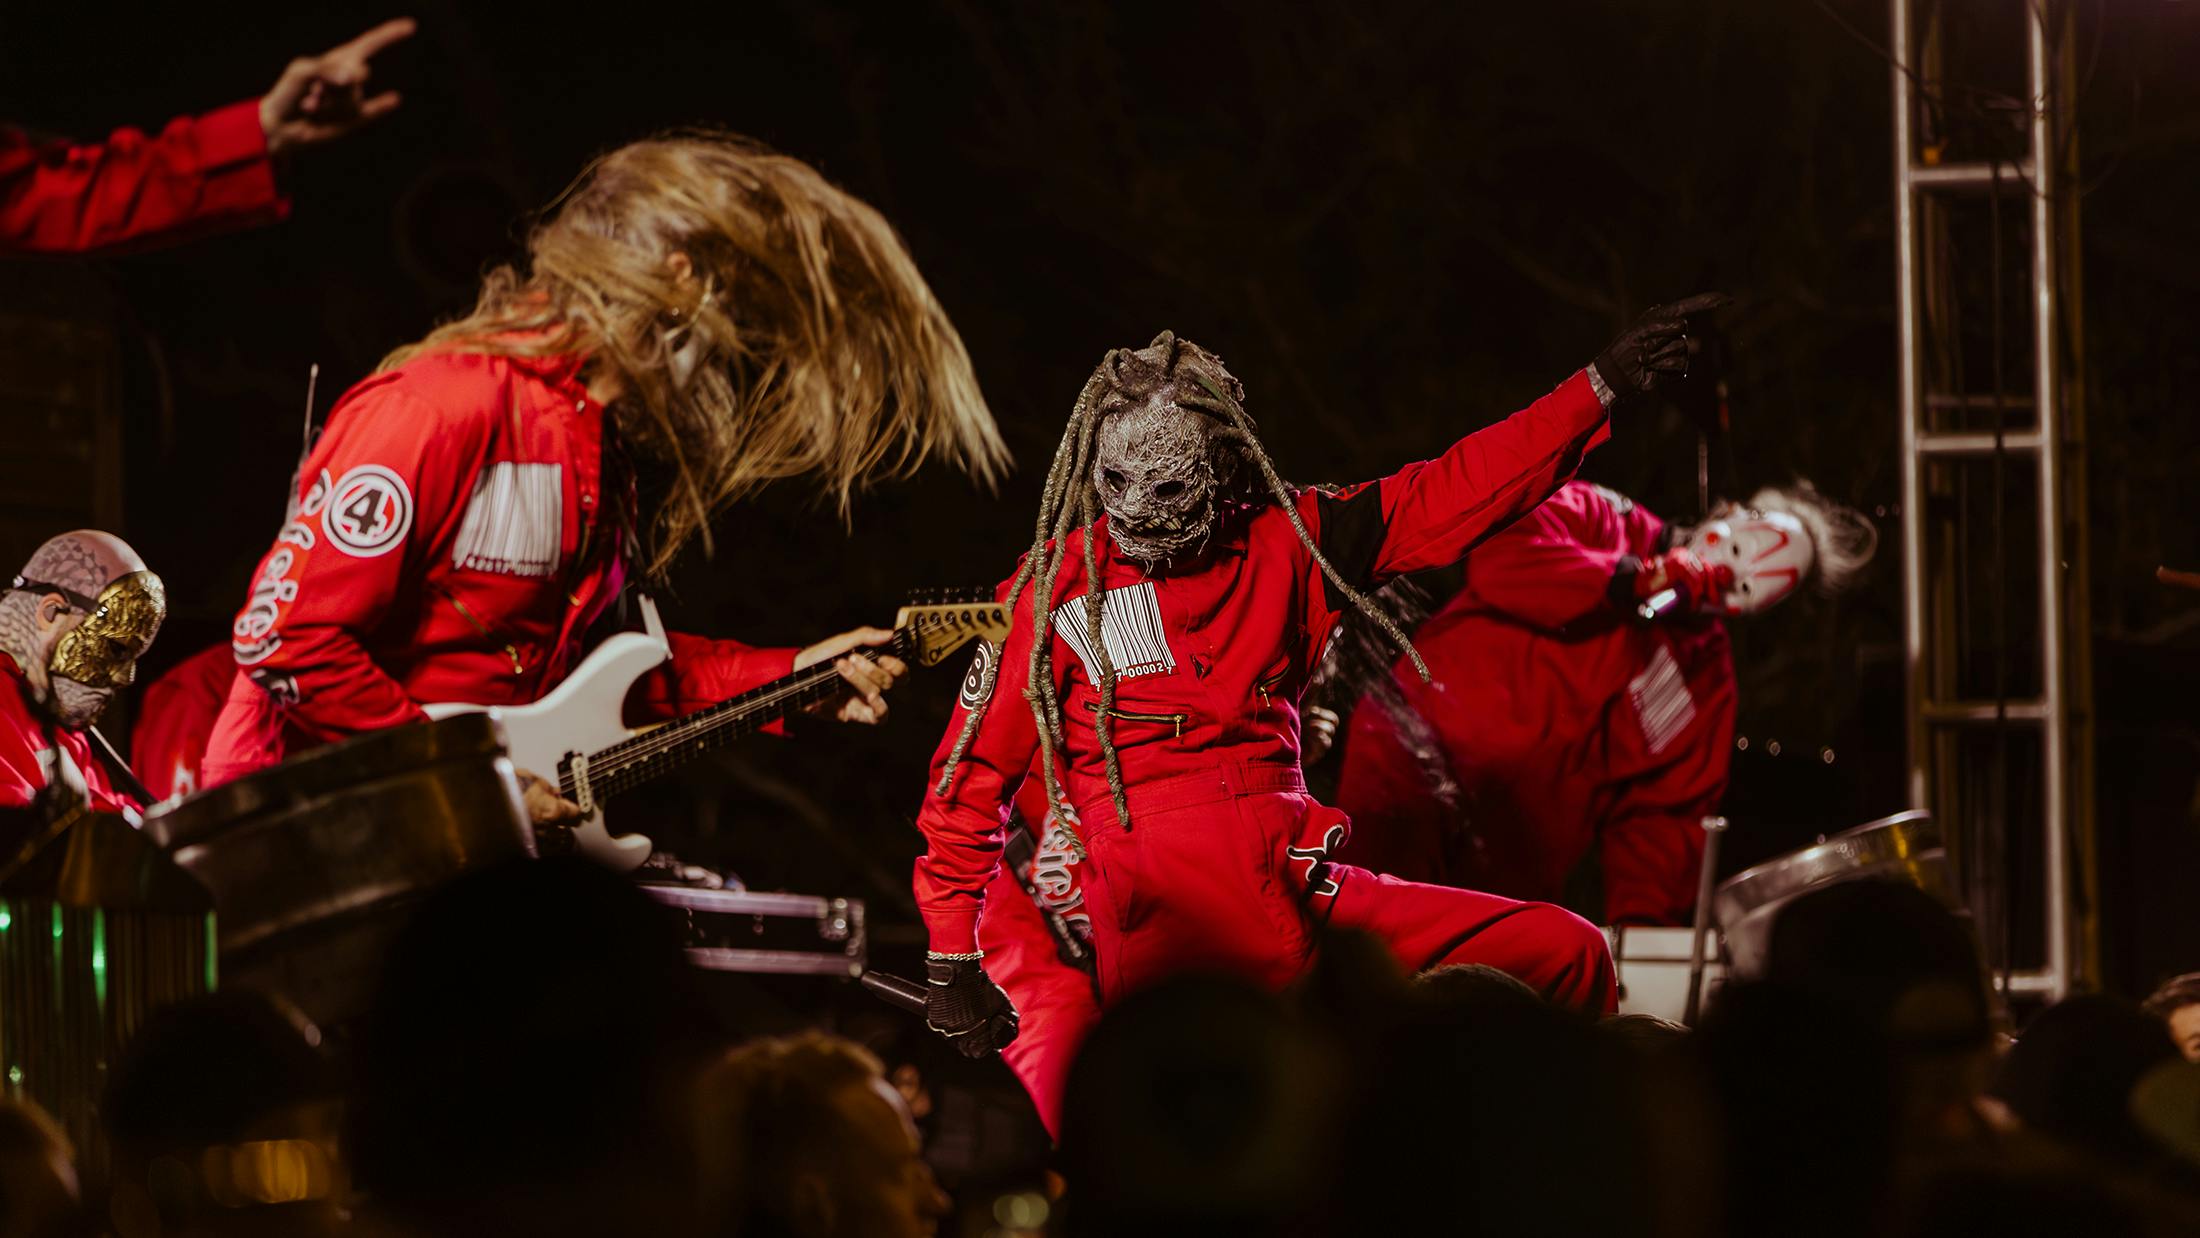 In pictures: Slipknot’s tiny secret show at a bar in California